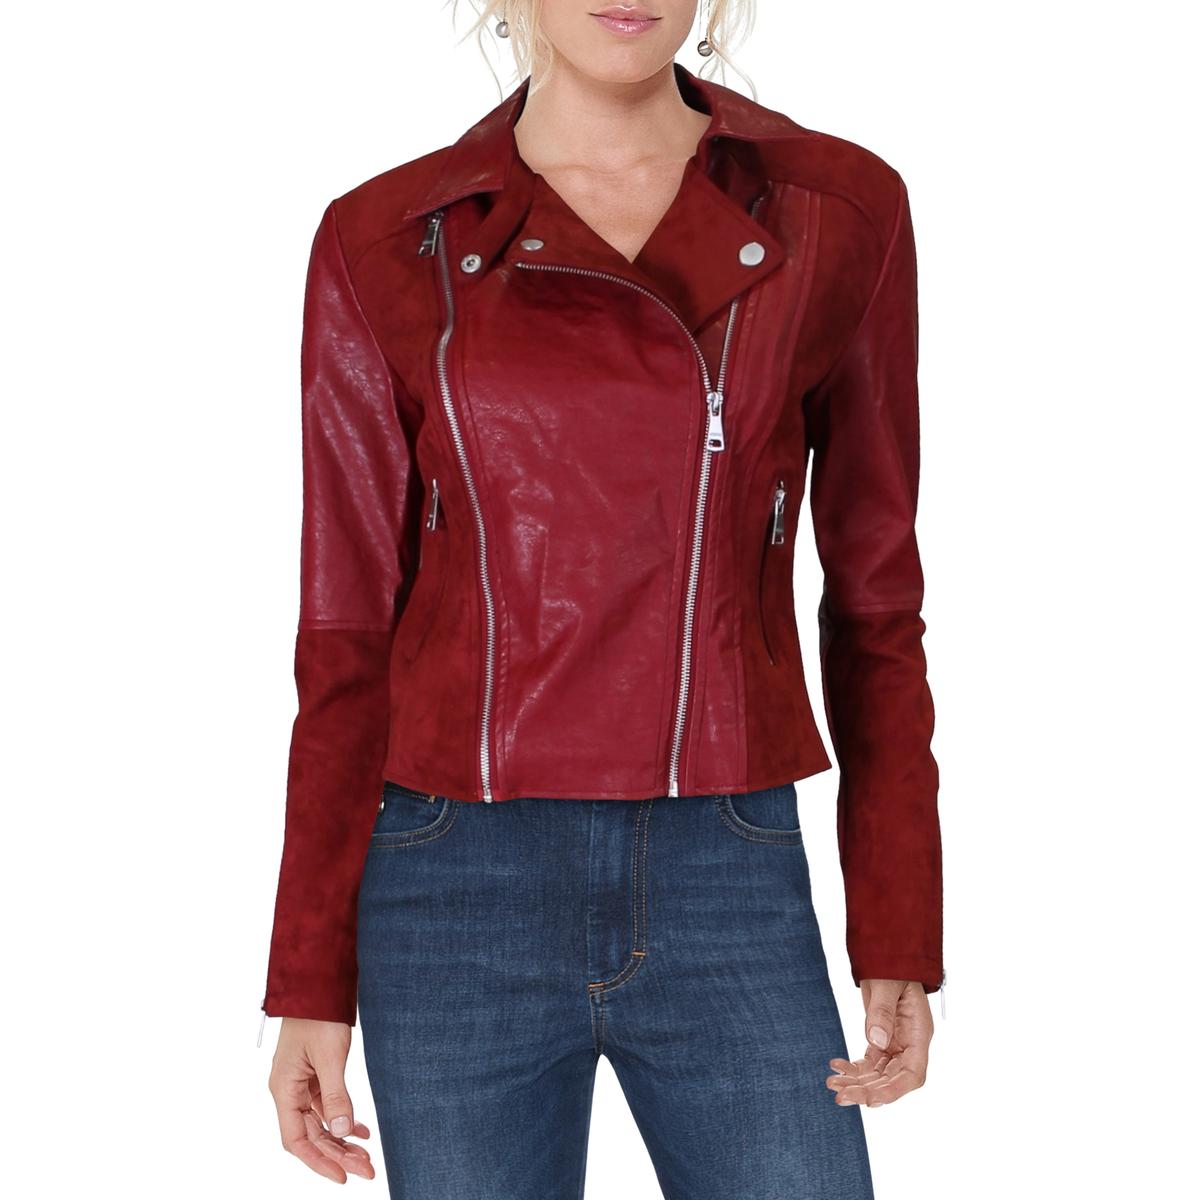 Vigoss Womens Red Faux Suede Mixed Media Motorcycle Jacket